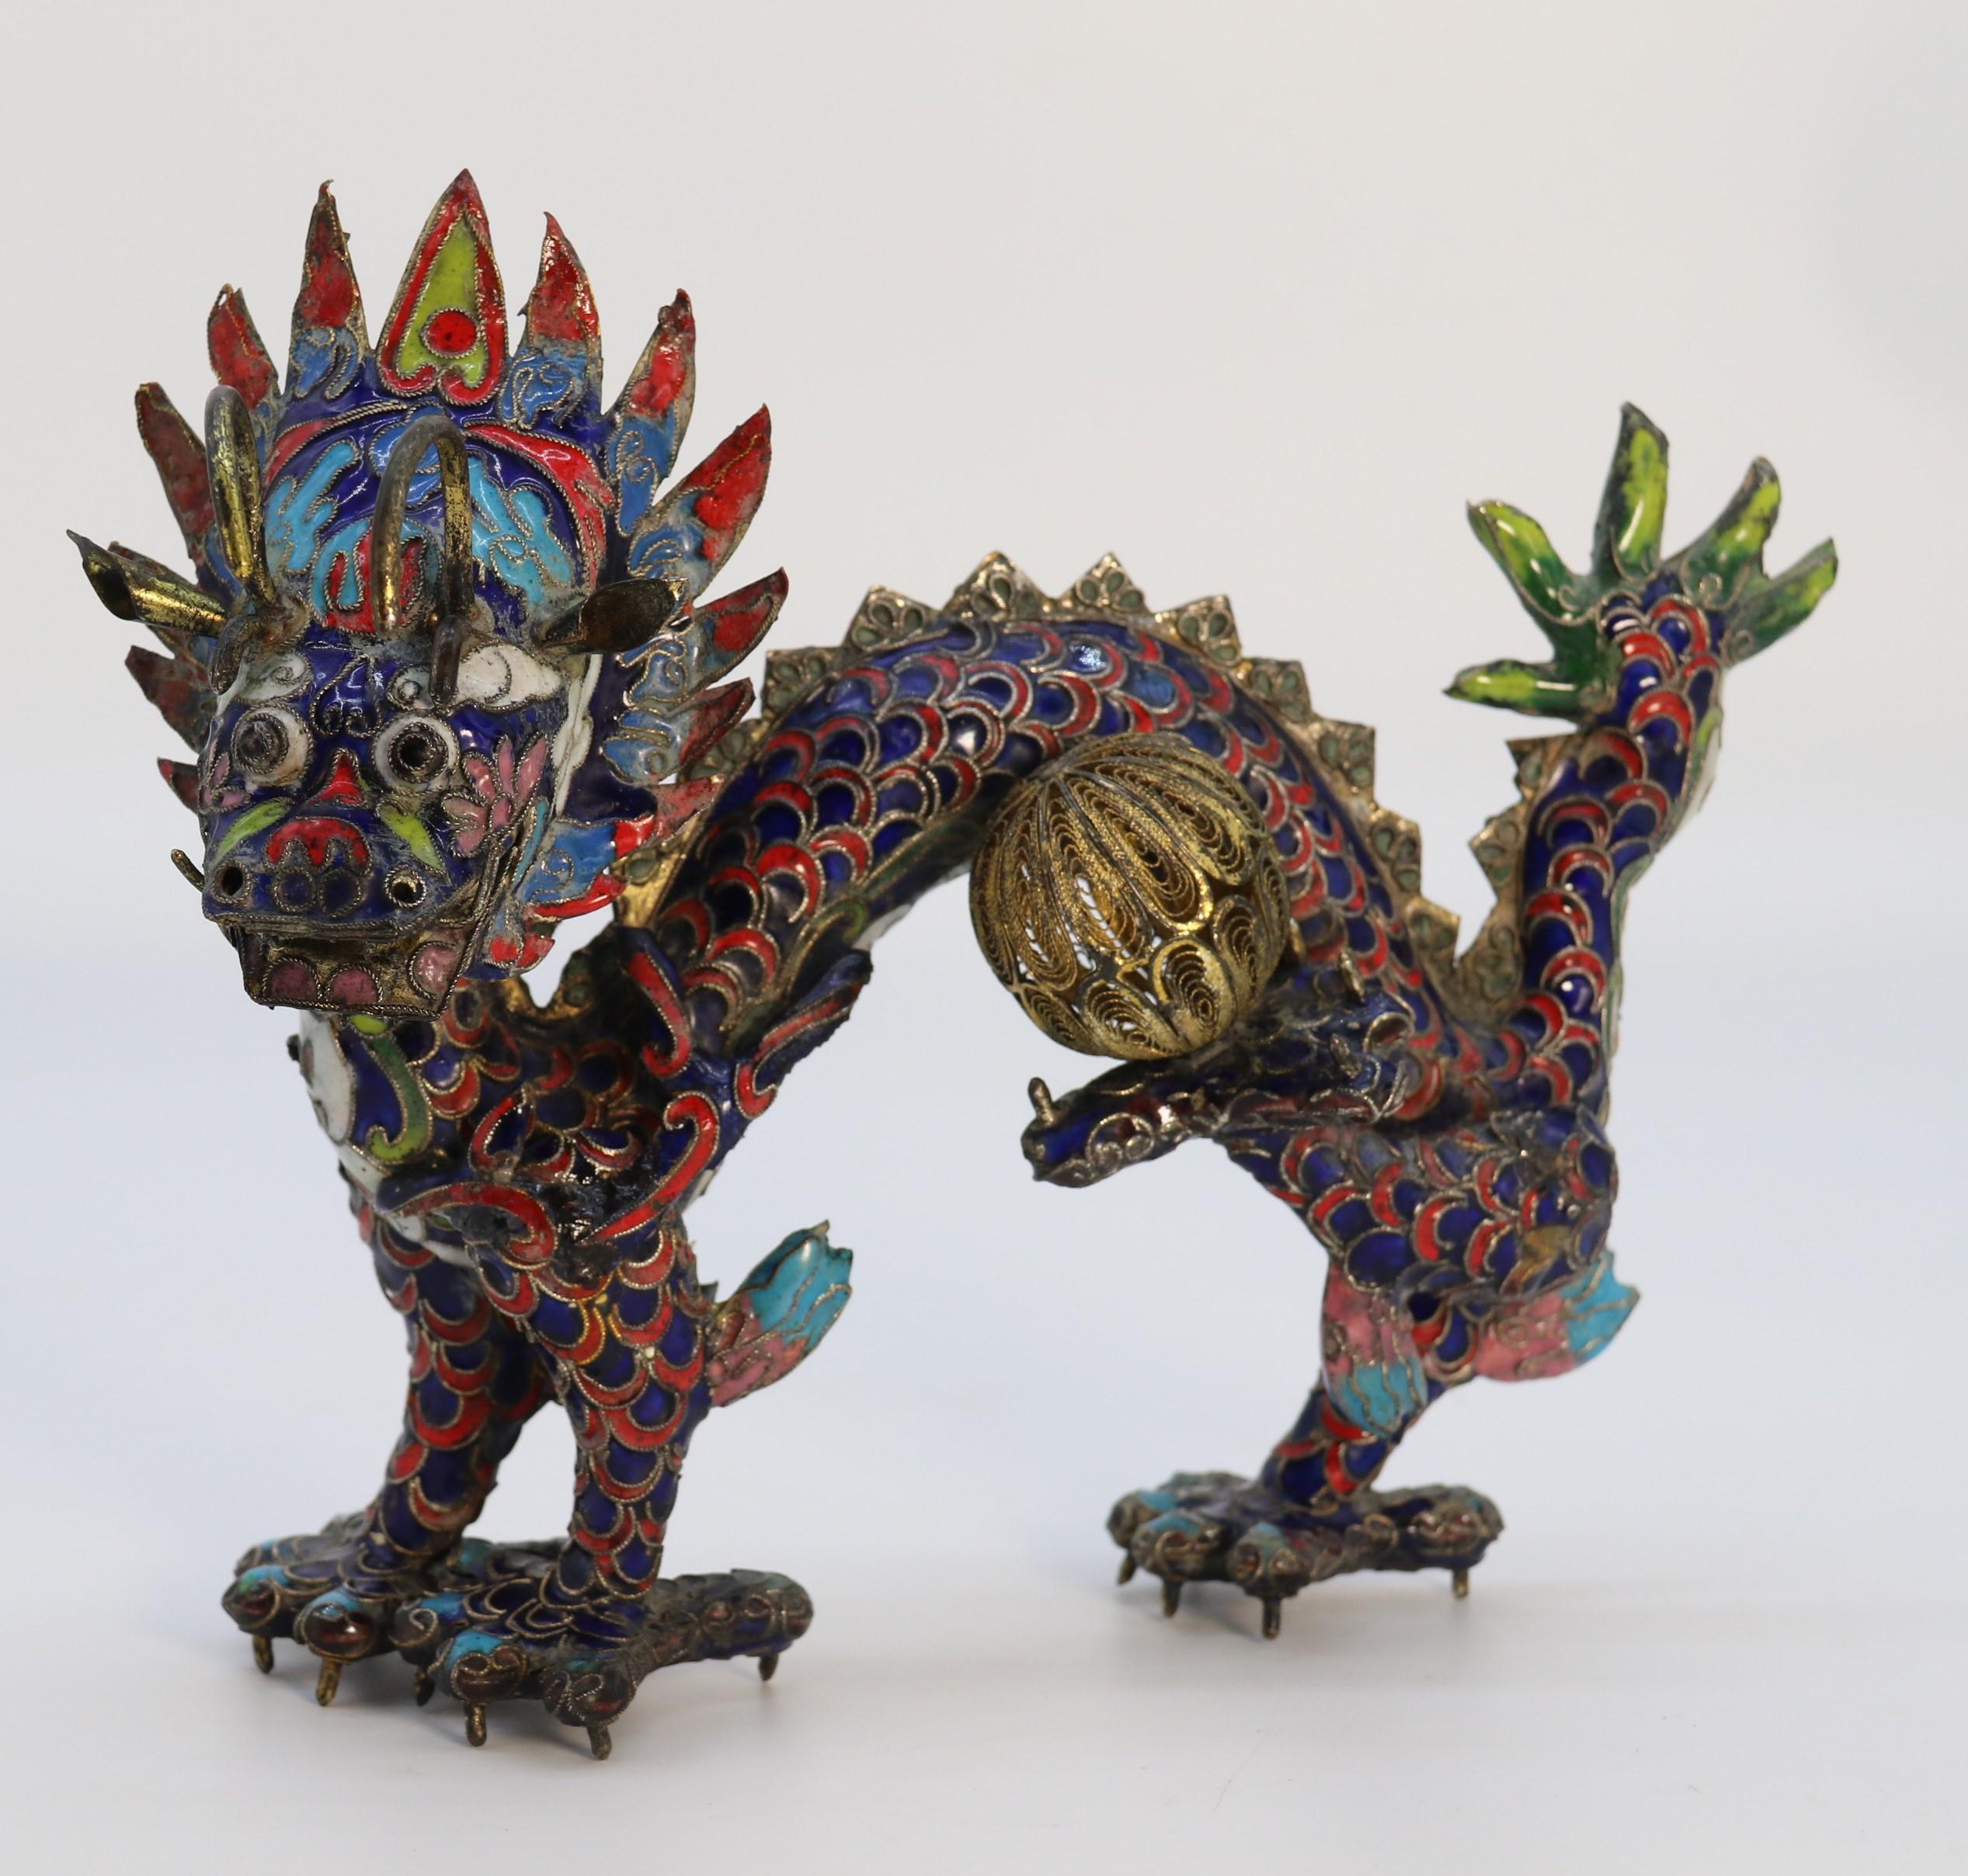 An early 20th century Chinese decorative cloisonne sculpture of a five clawed dragon gripping a ball.

This bright and unusual dragon is a Chinese work of art and dates to circa 1930. It has been hand made from thin beaten copper forming the hollow